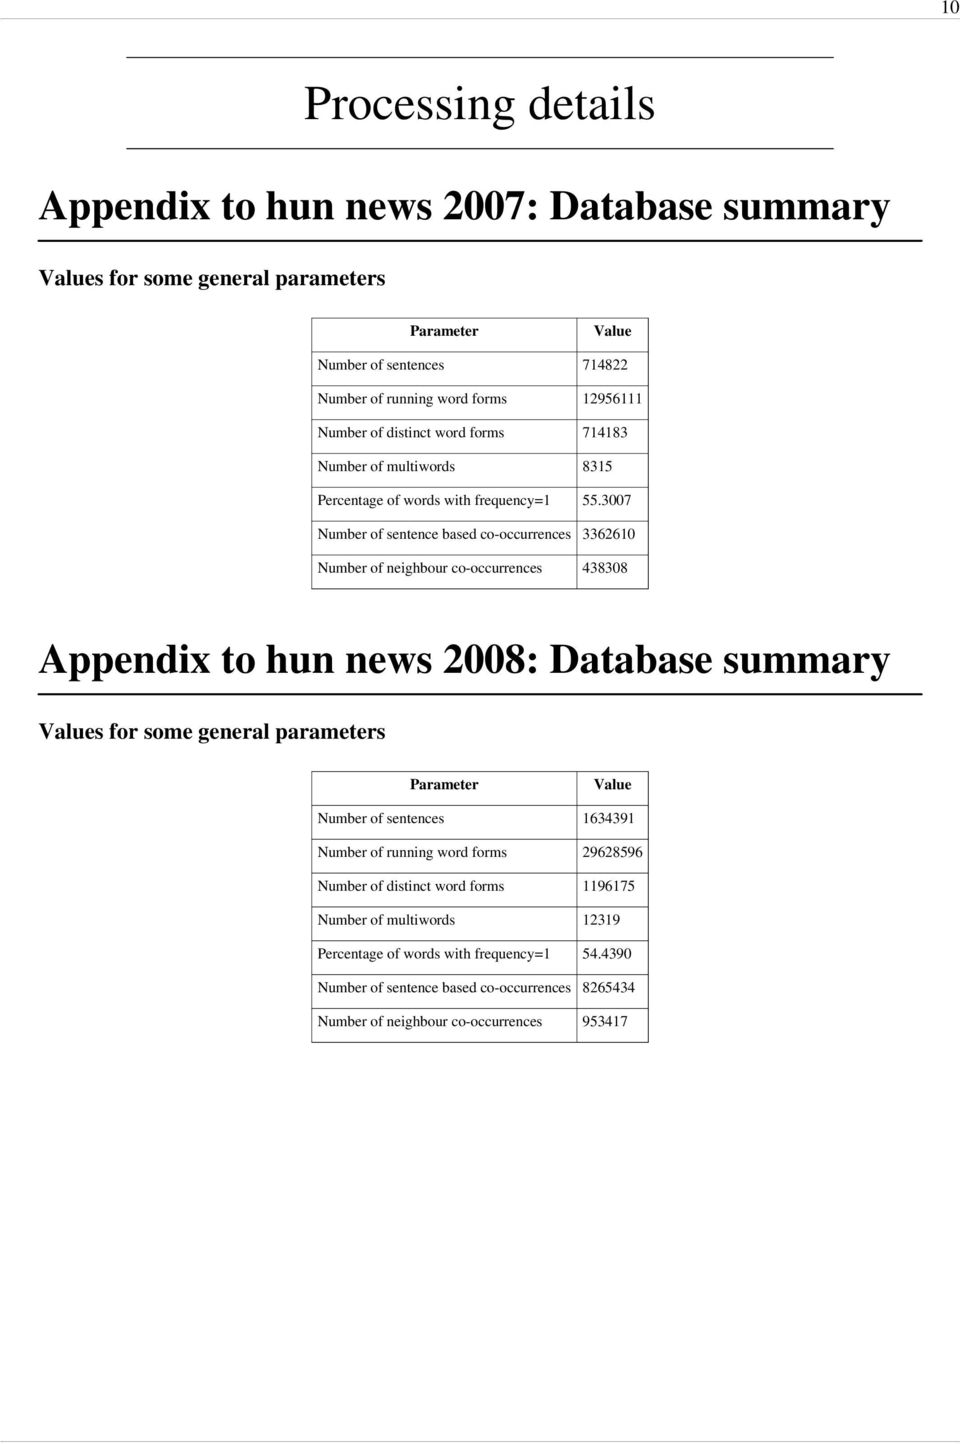 3007 Number of sentence based co-occurrences 3362610 Number of neighbour co-occurrences 438308 Appendix to hun news 2008: Database summary Values for some general parameters Parameter